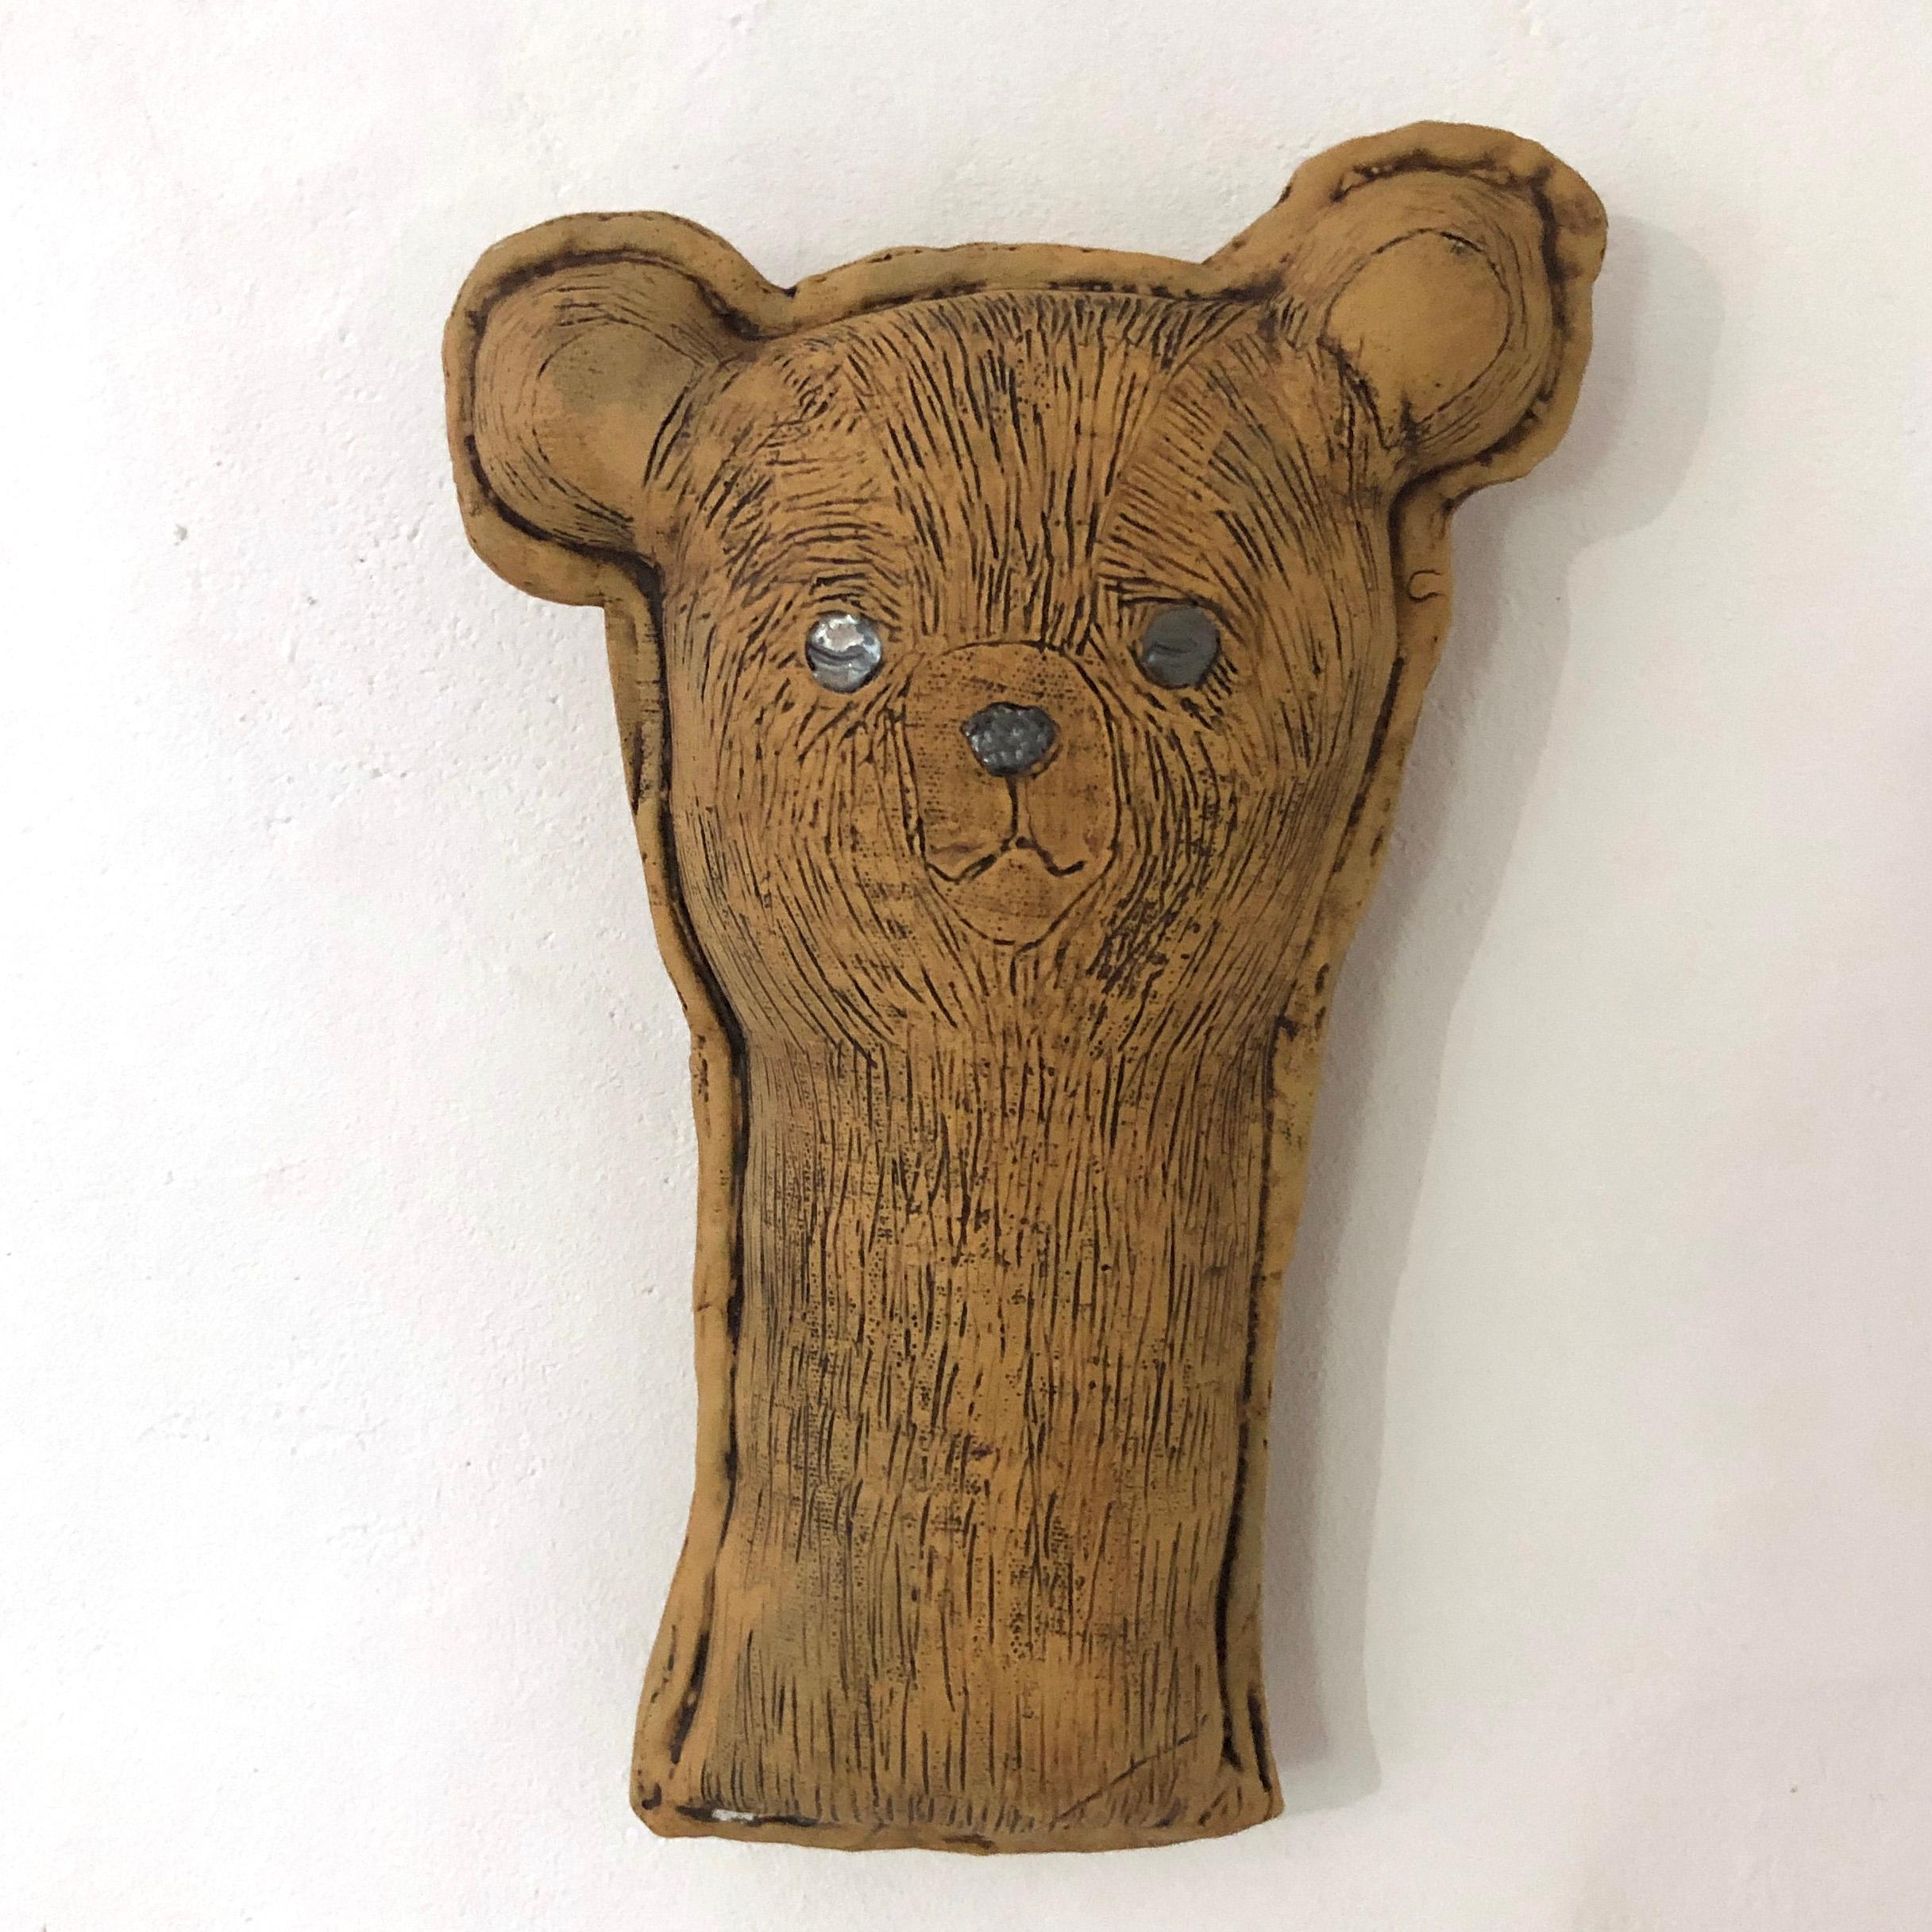 Renate Frotscher Figurative Sculpture - Théodora Béatrice the first or simply "Teddy B" - Contemporary Ceramic Wall Art